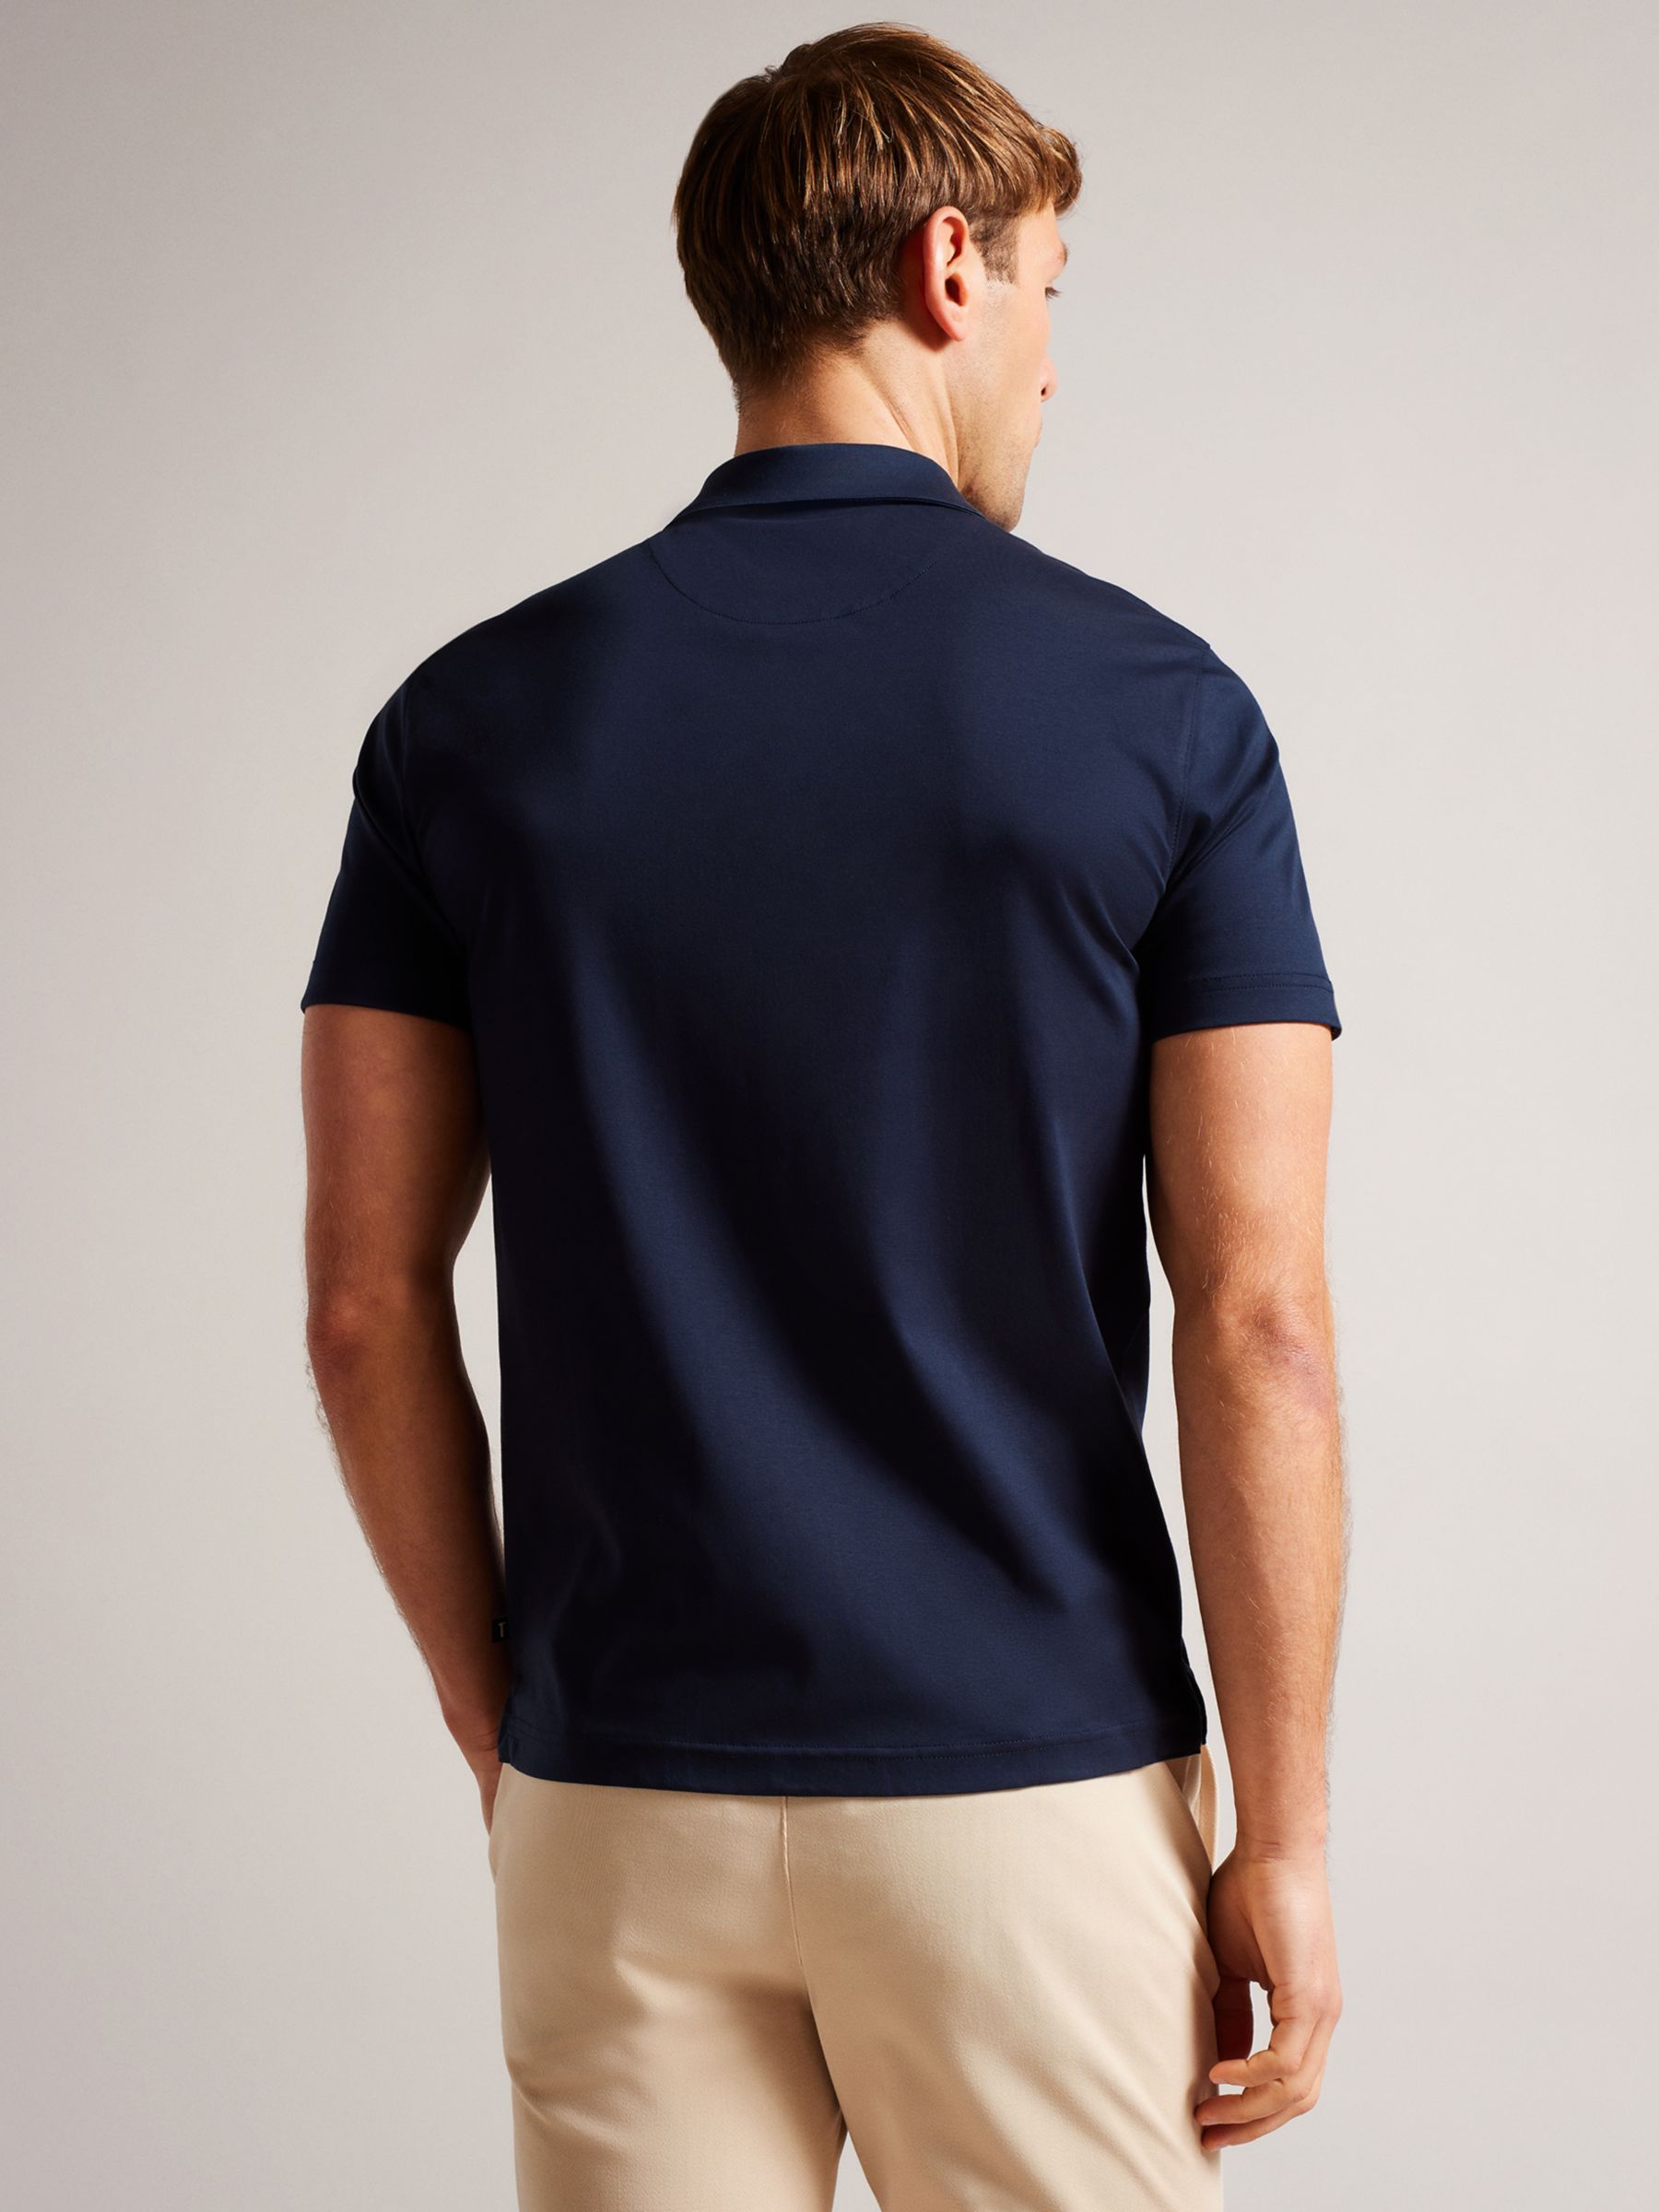 Ted Baker Zeiter Slim Fit Polo Shirt, Navy at John Lewis & Partners